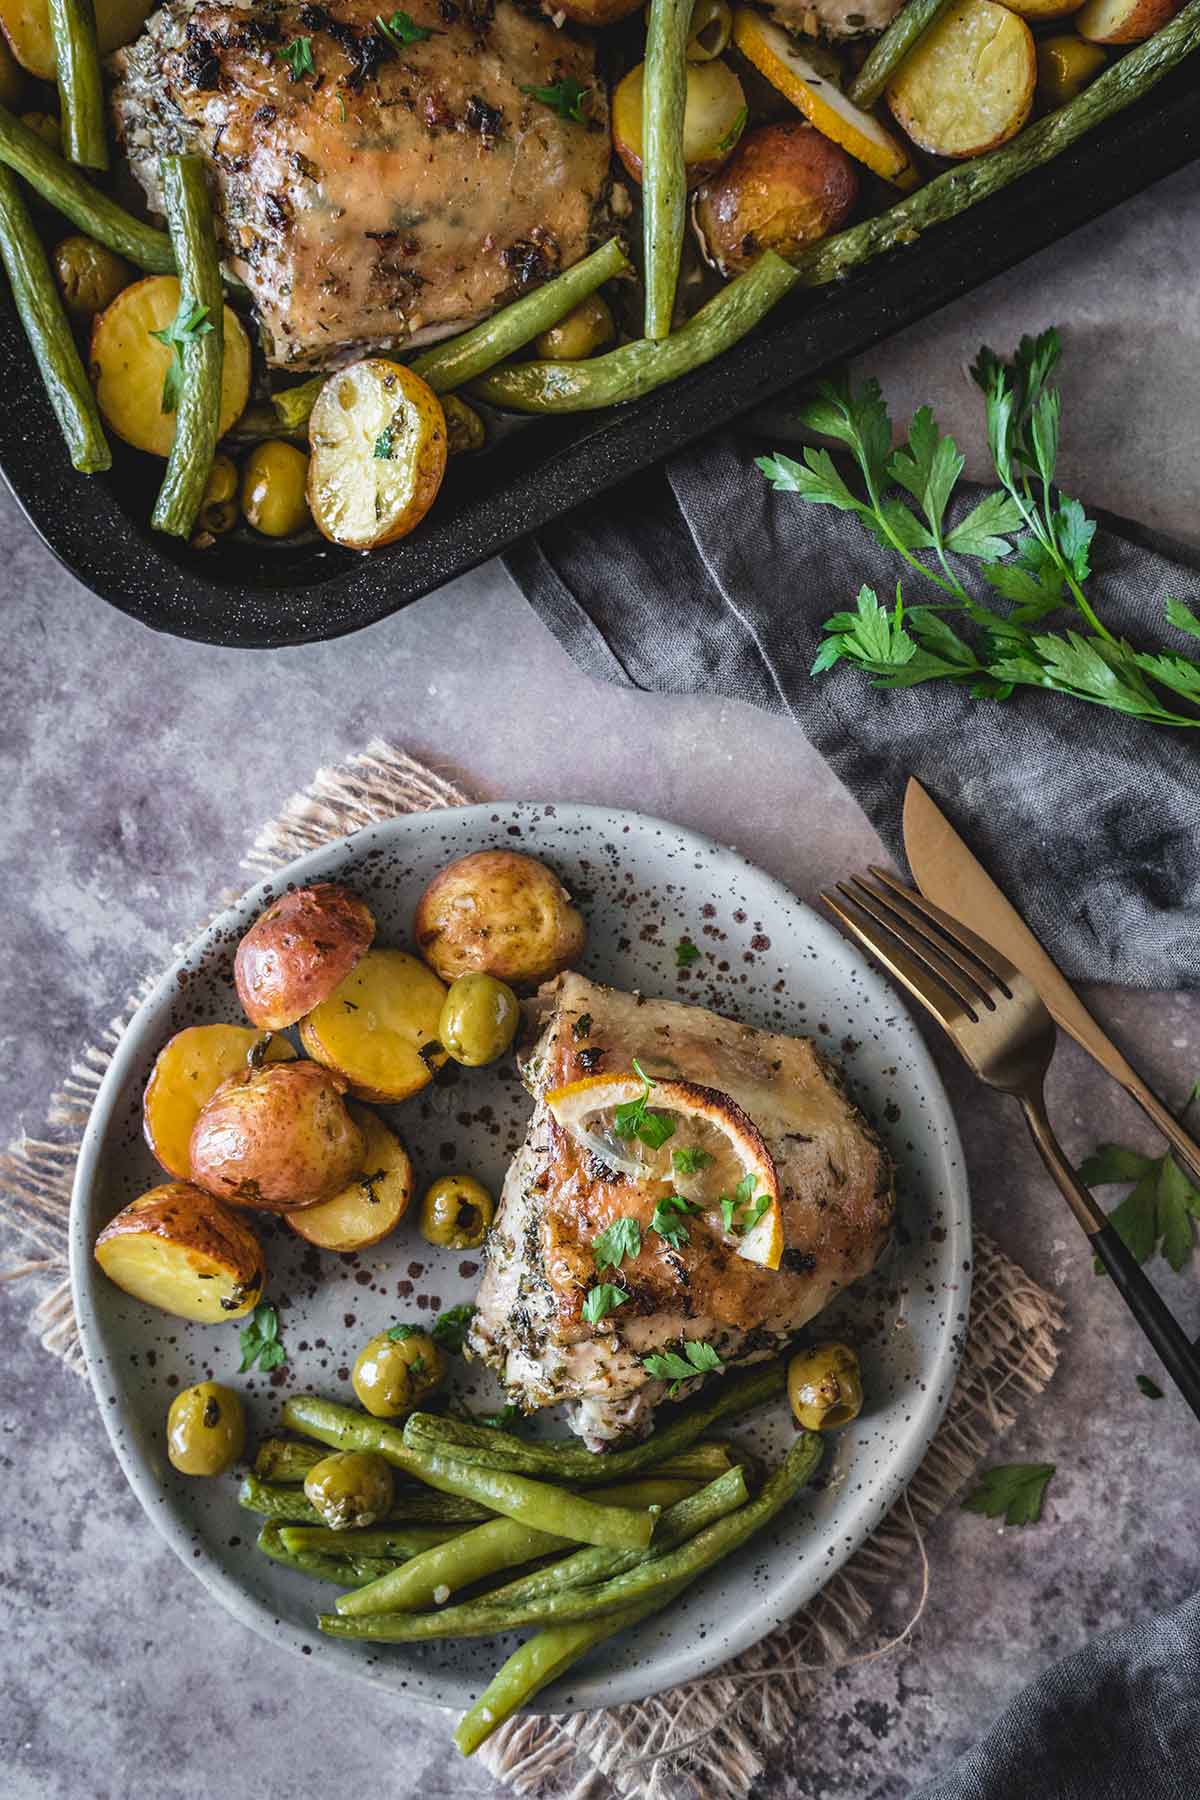 Chicken, green beans, and potatoes served on the plate